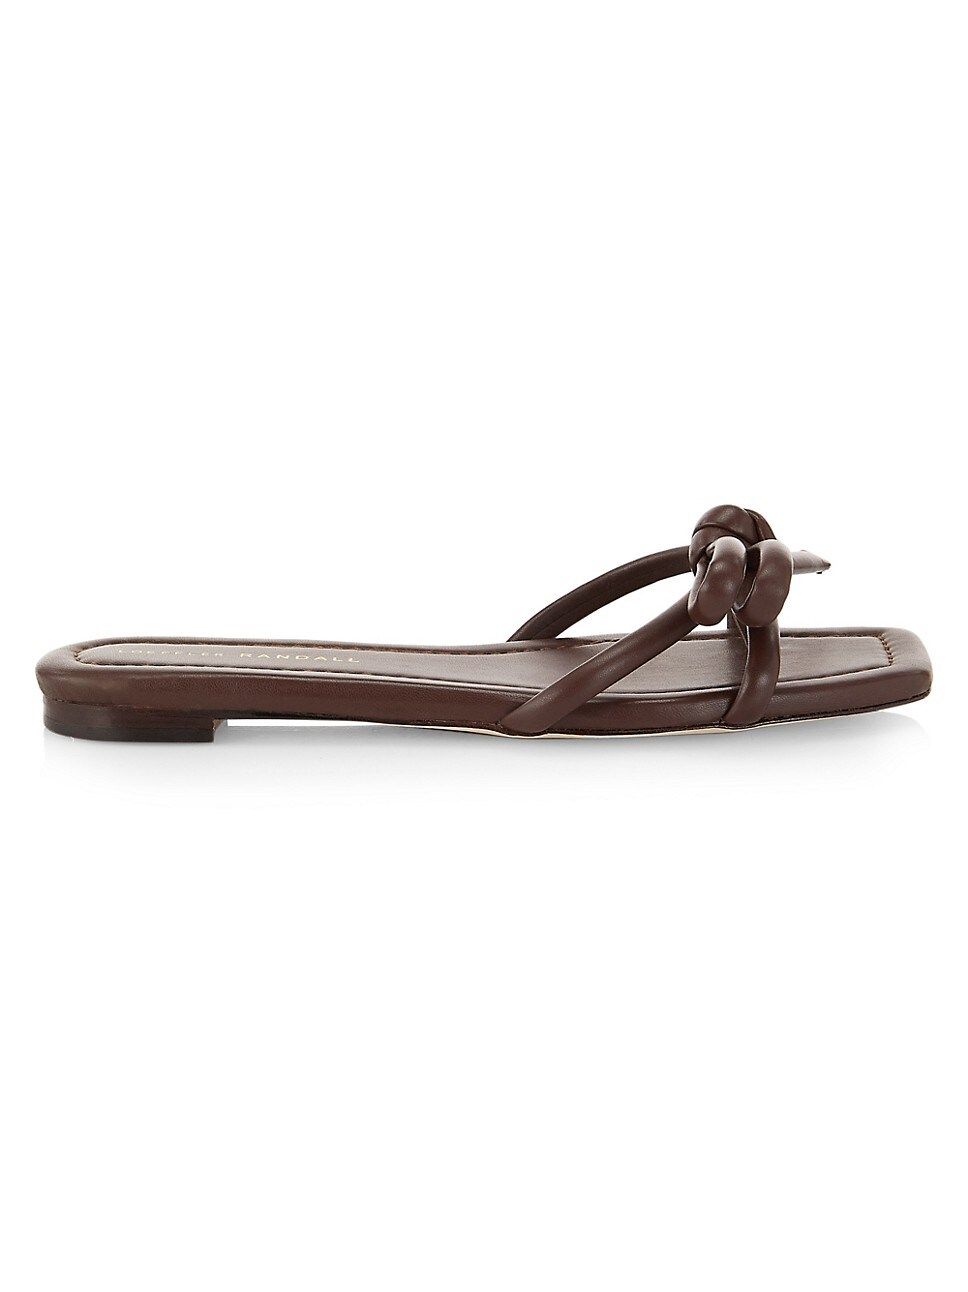 Hadley Leather Bow Sandals | Saks Fifth Avenue